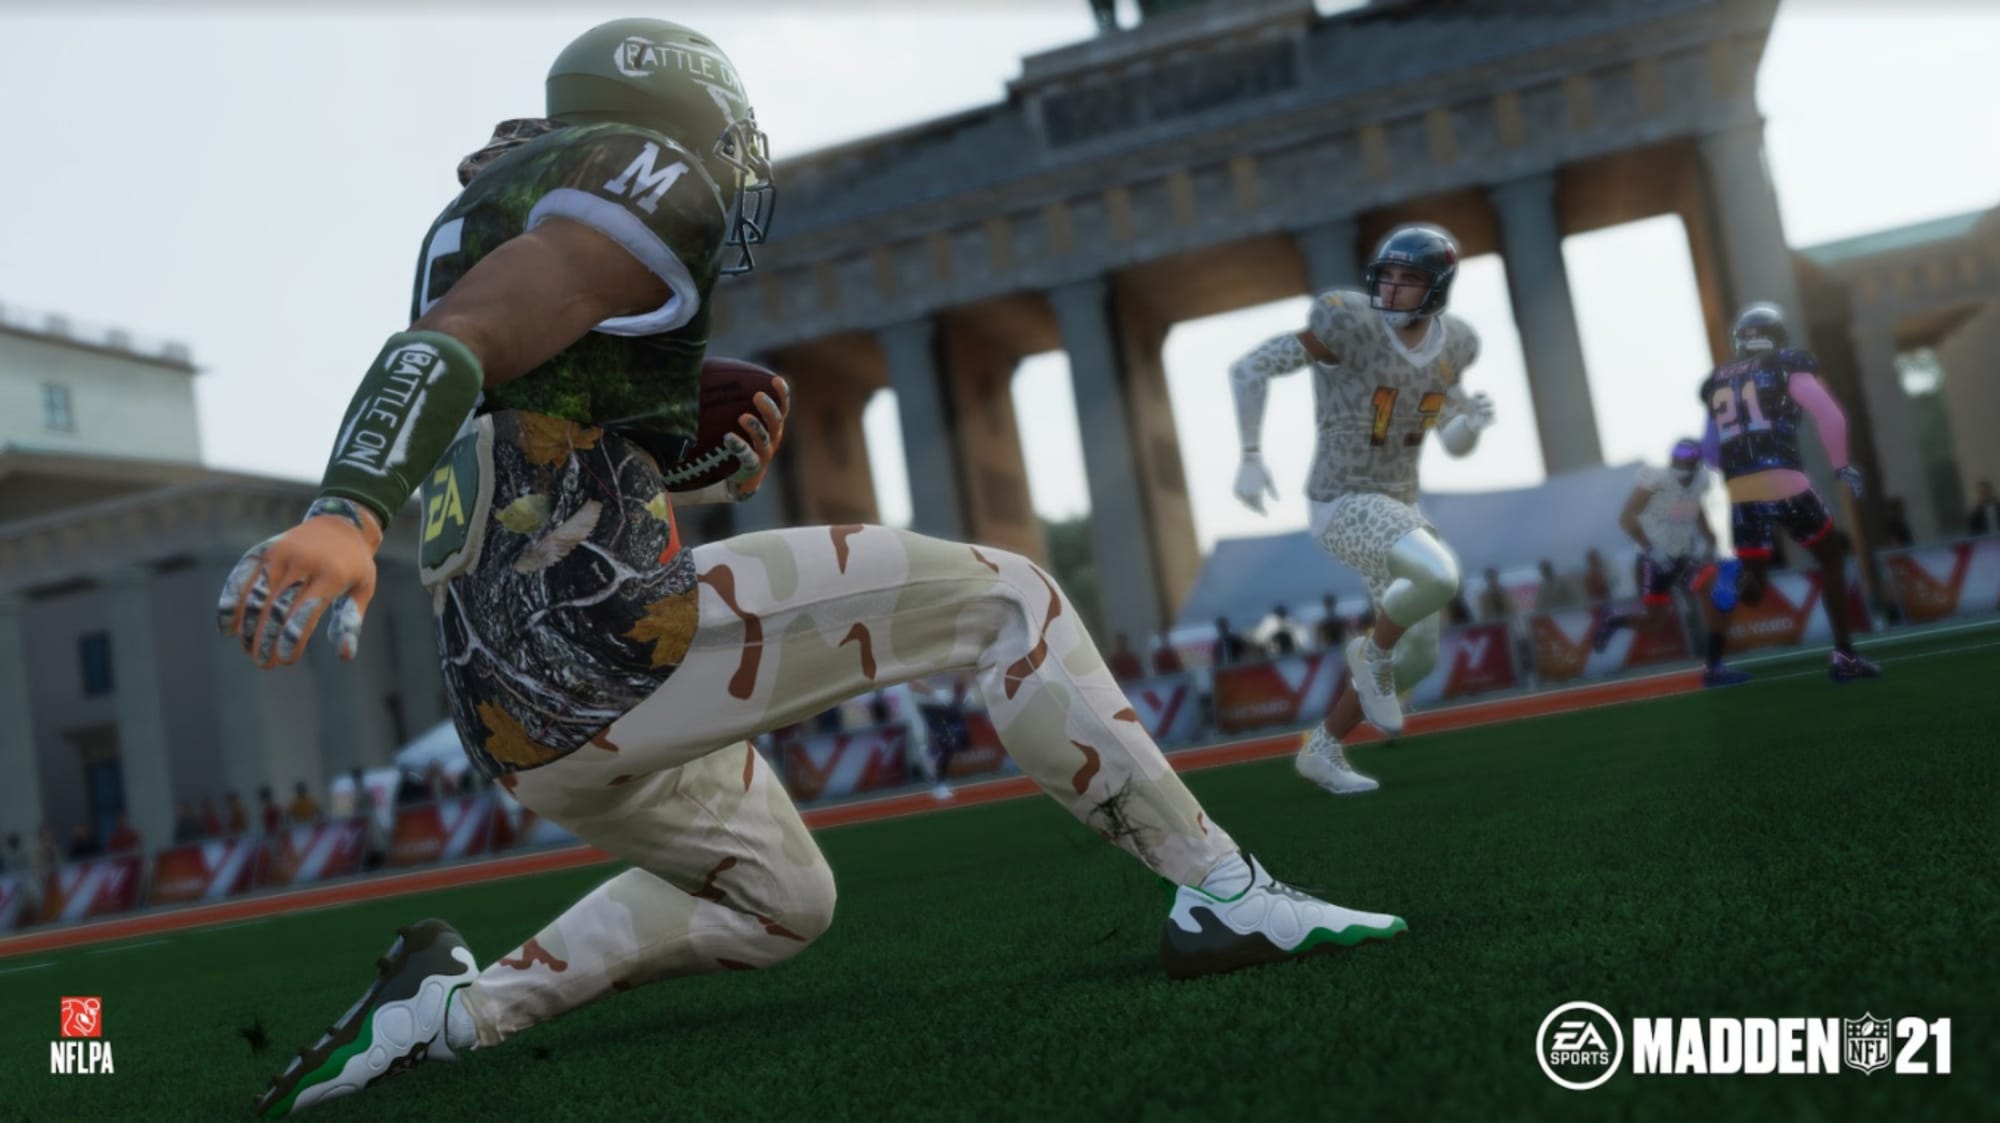 The Yard In Madden 21 Might Be The Best Feature Added In Years